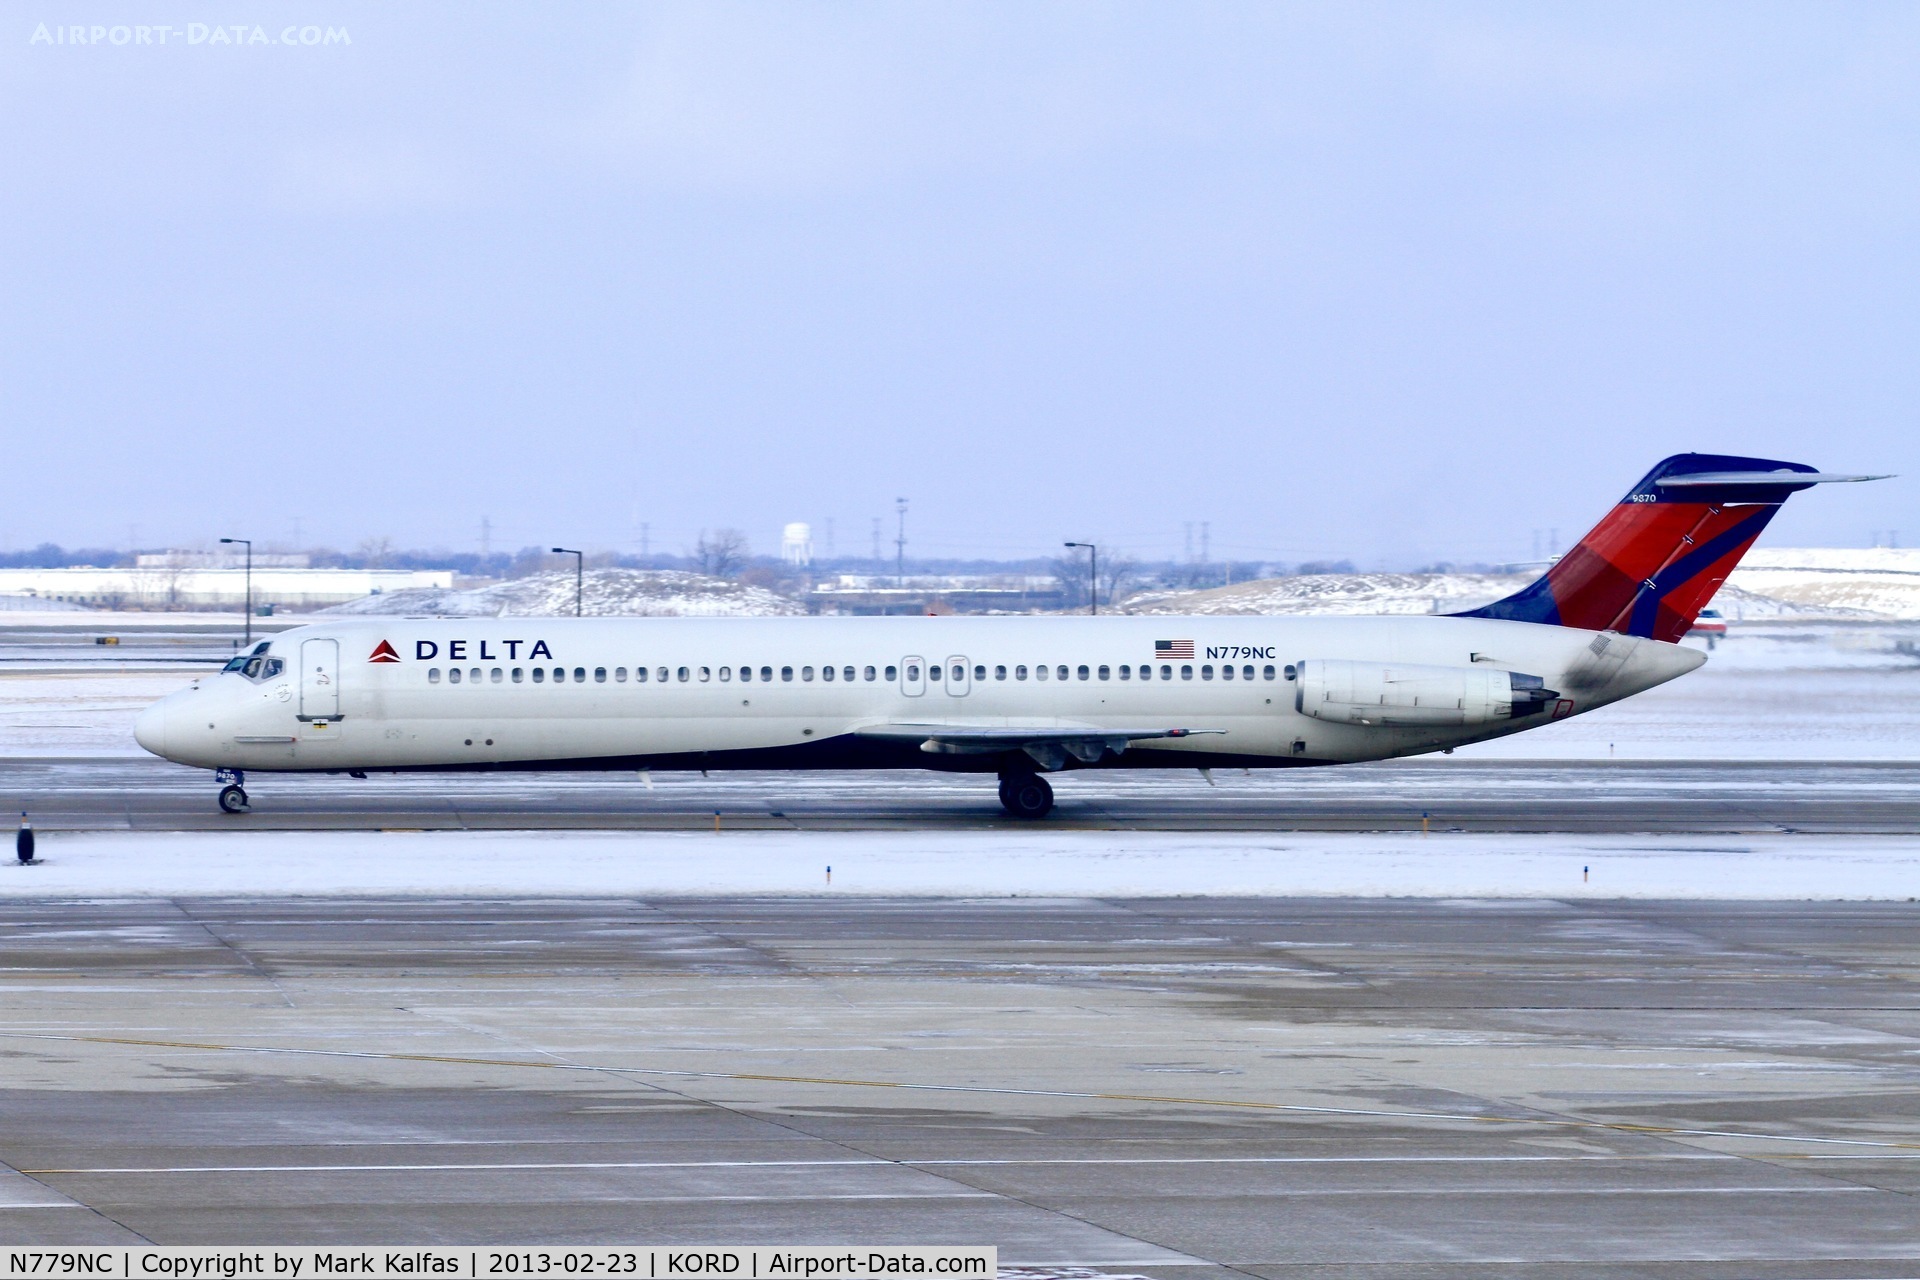 N779NC, 1979 McDonnell Douglas DC-9-51 C/N 48101, Delta McDonnell Douglas DC-9-51, N779NC taxiing to gate at ORD